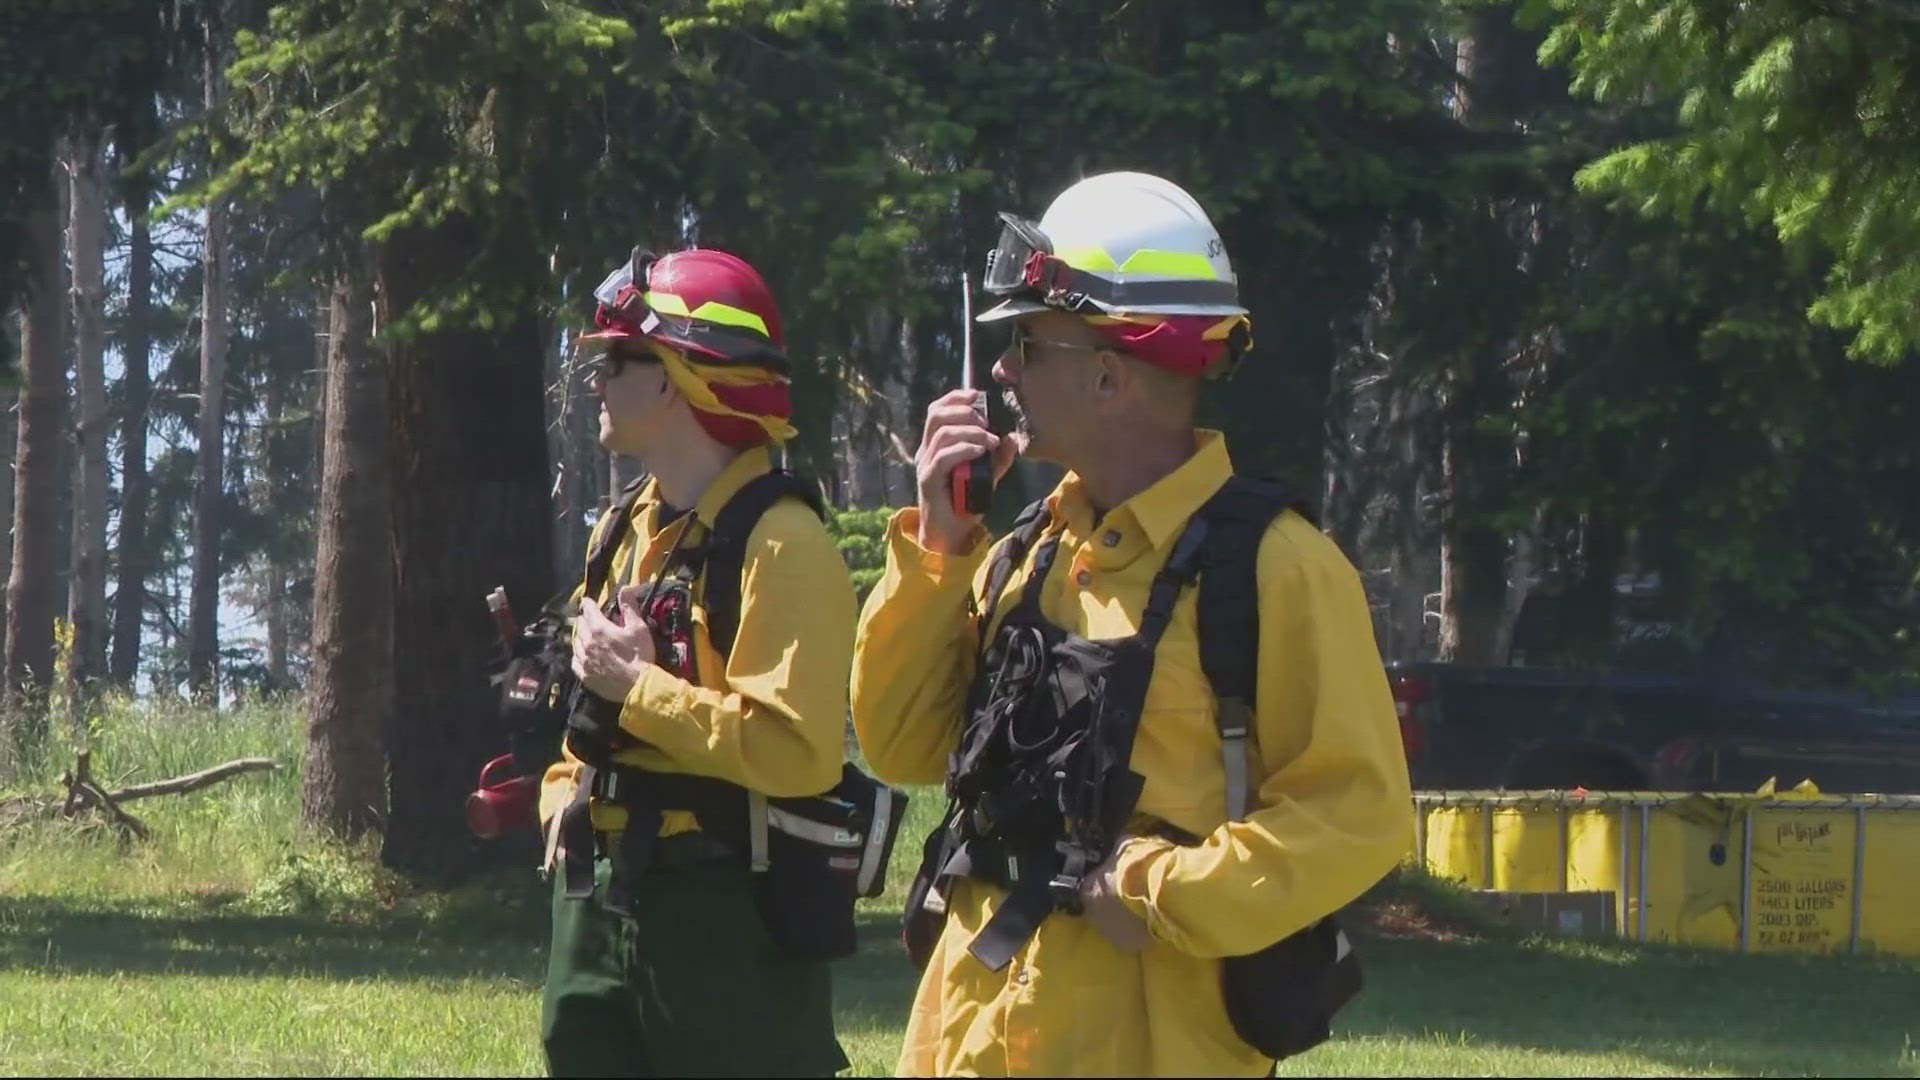 Firefighters recently gathered in Molalla for a two-day training to learn how to better prepare for wildfire season this summer.